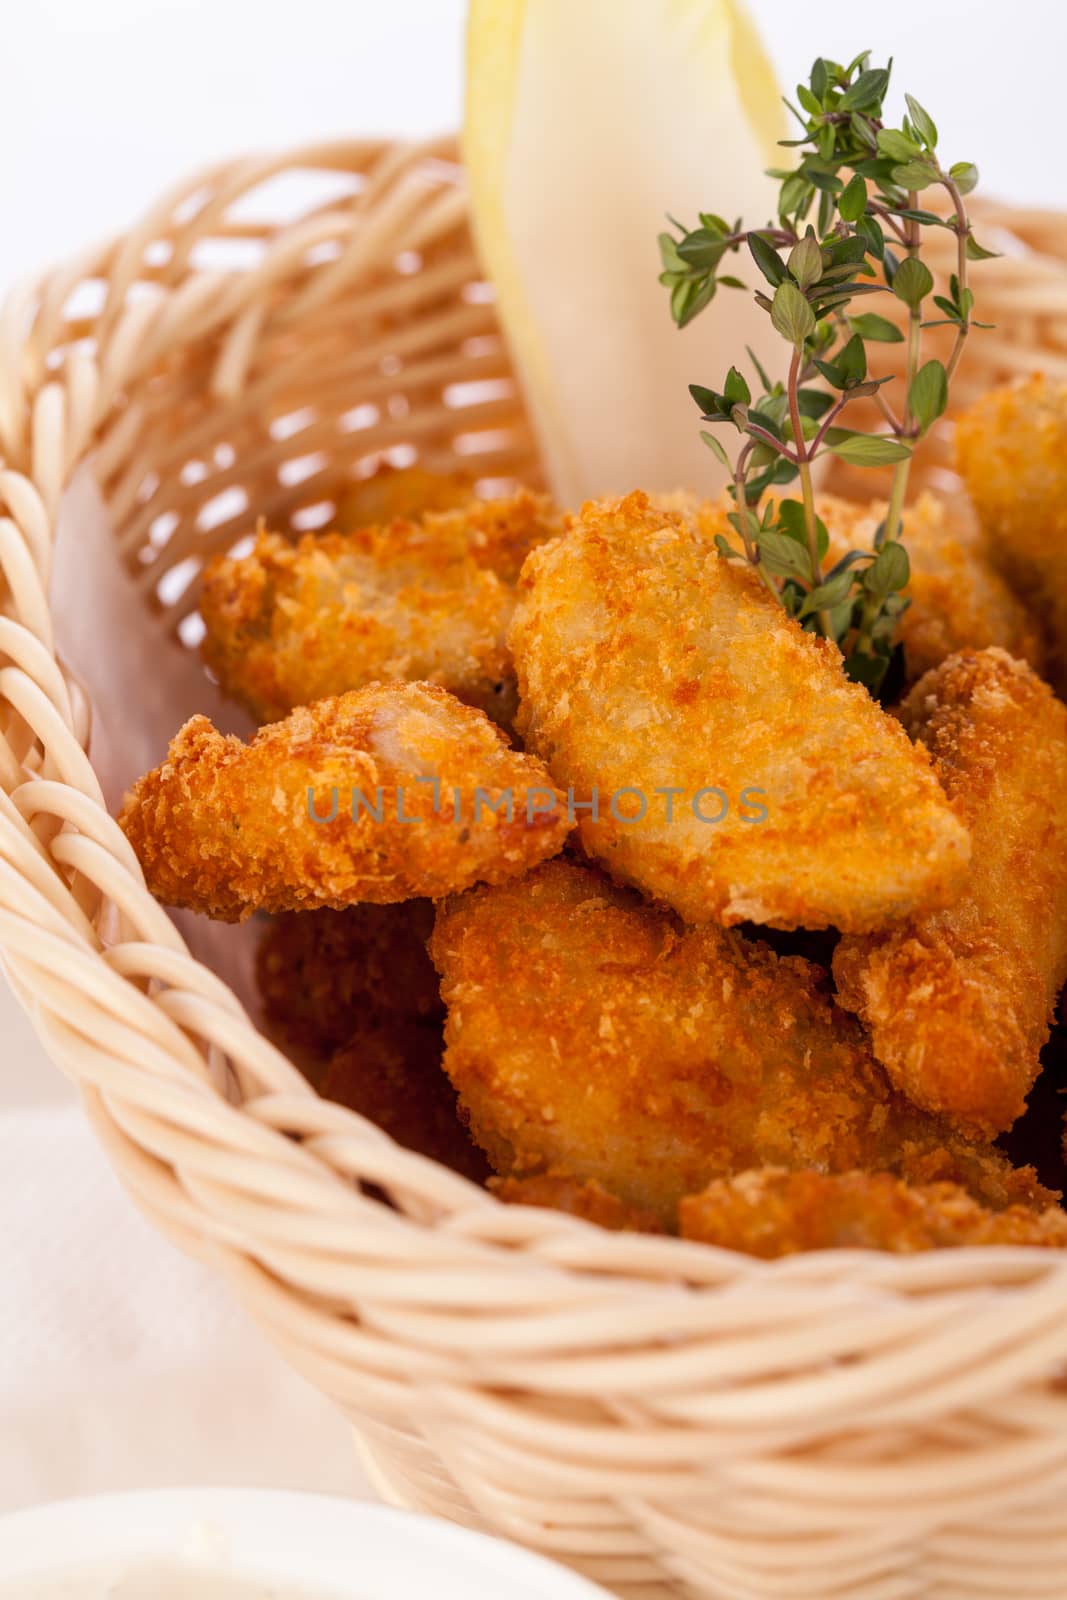 Crumbed chicken nuggets in a basket by juniart